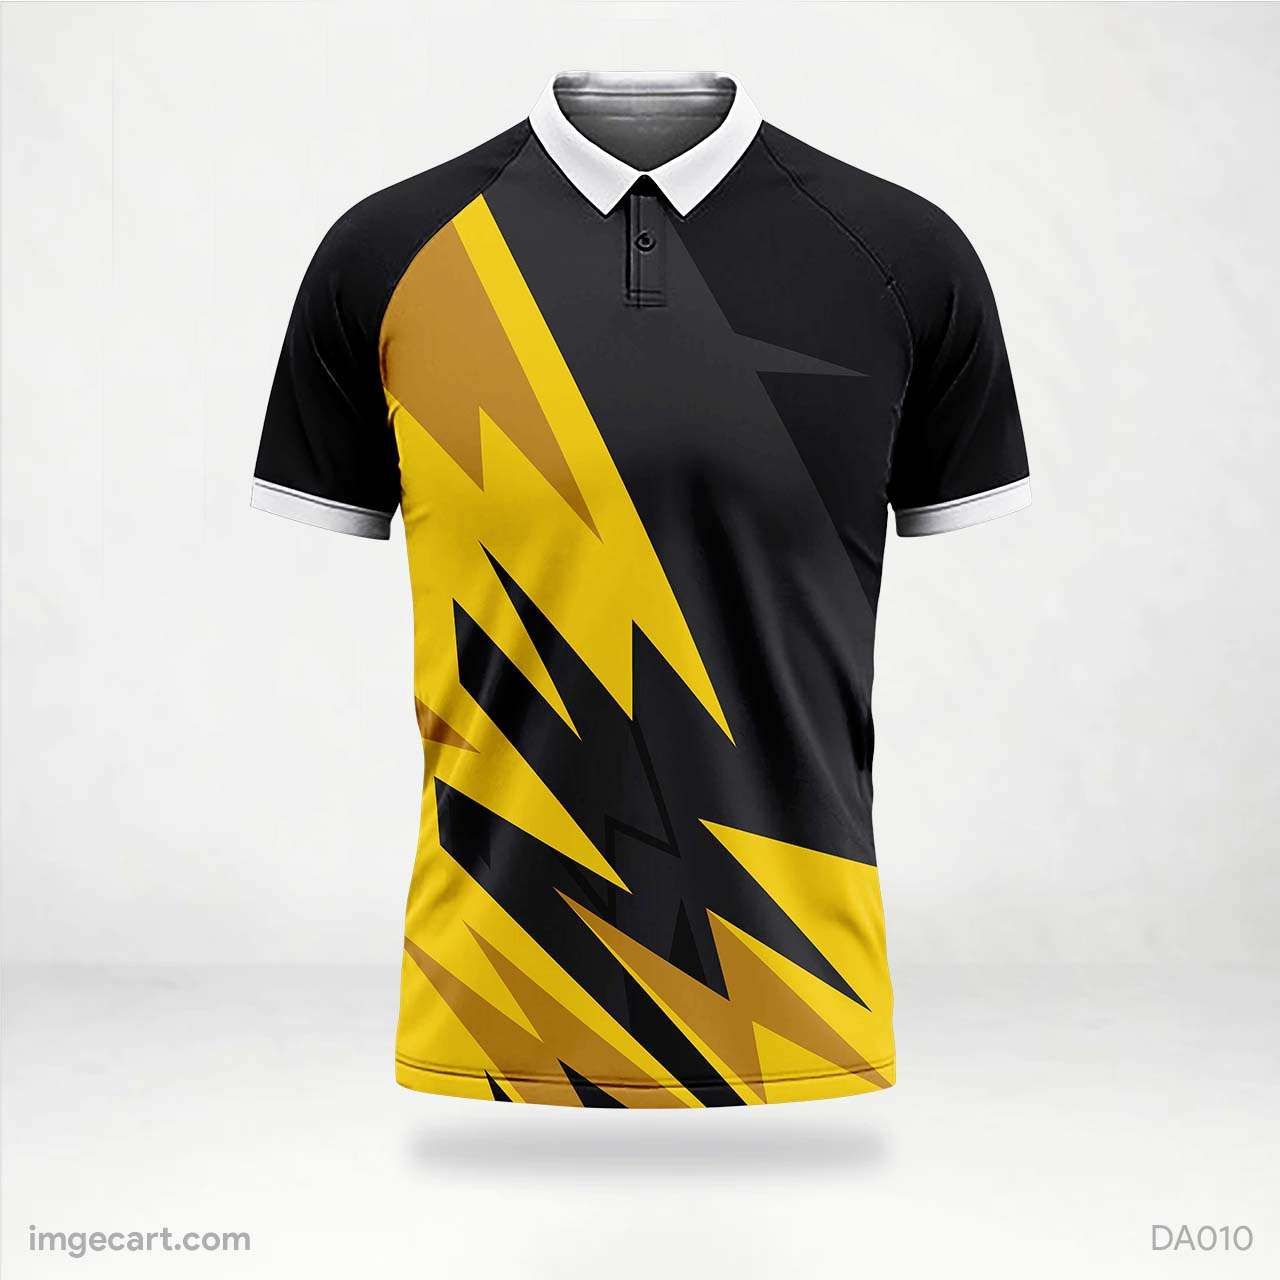 Cricket Jersey Design Black and Yellow Combination